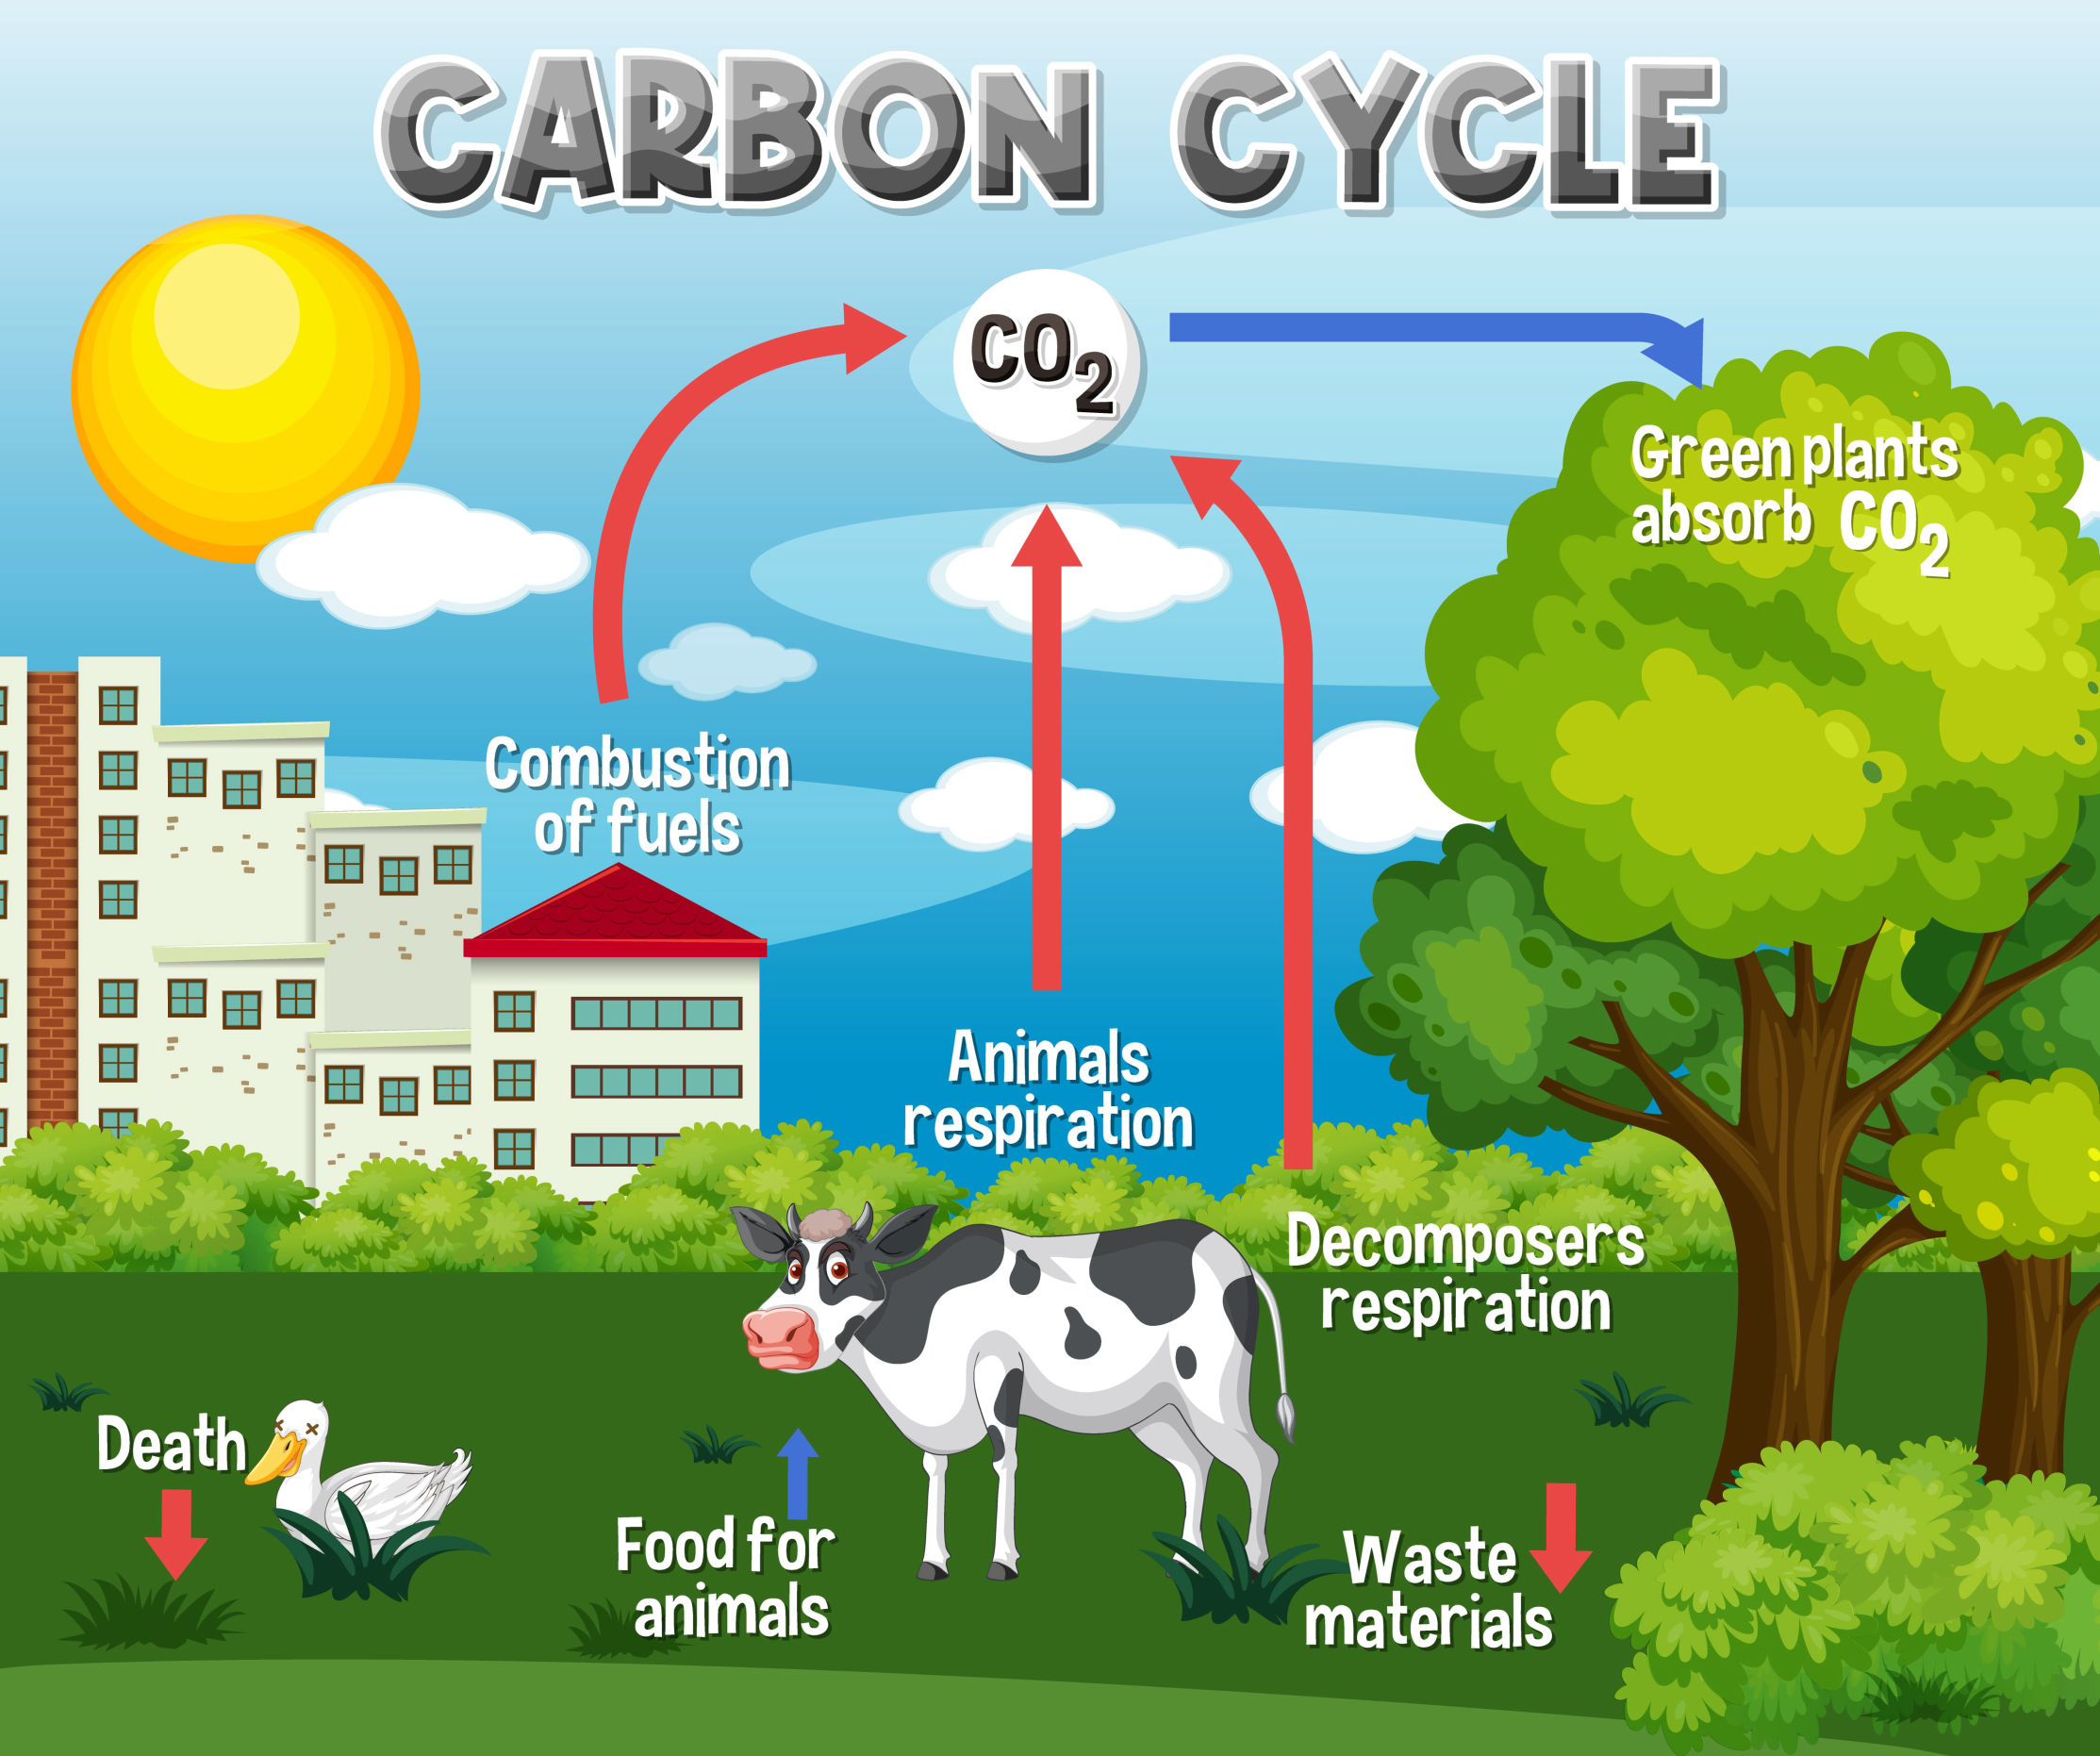 Carbon Cycle, CO2 waste, CO2 cycle